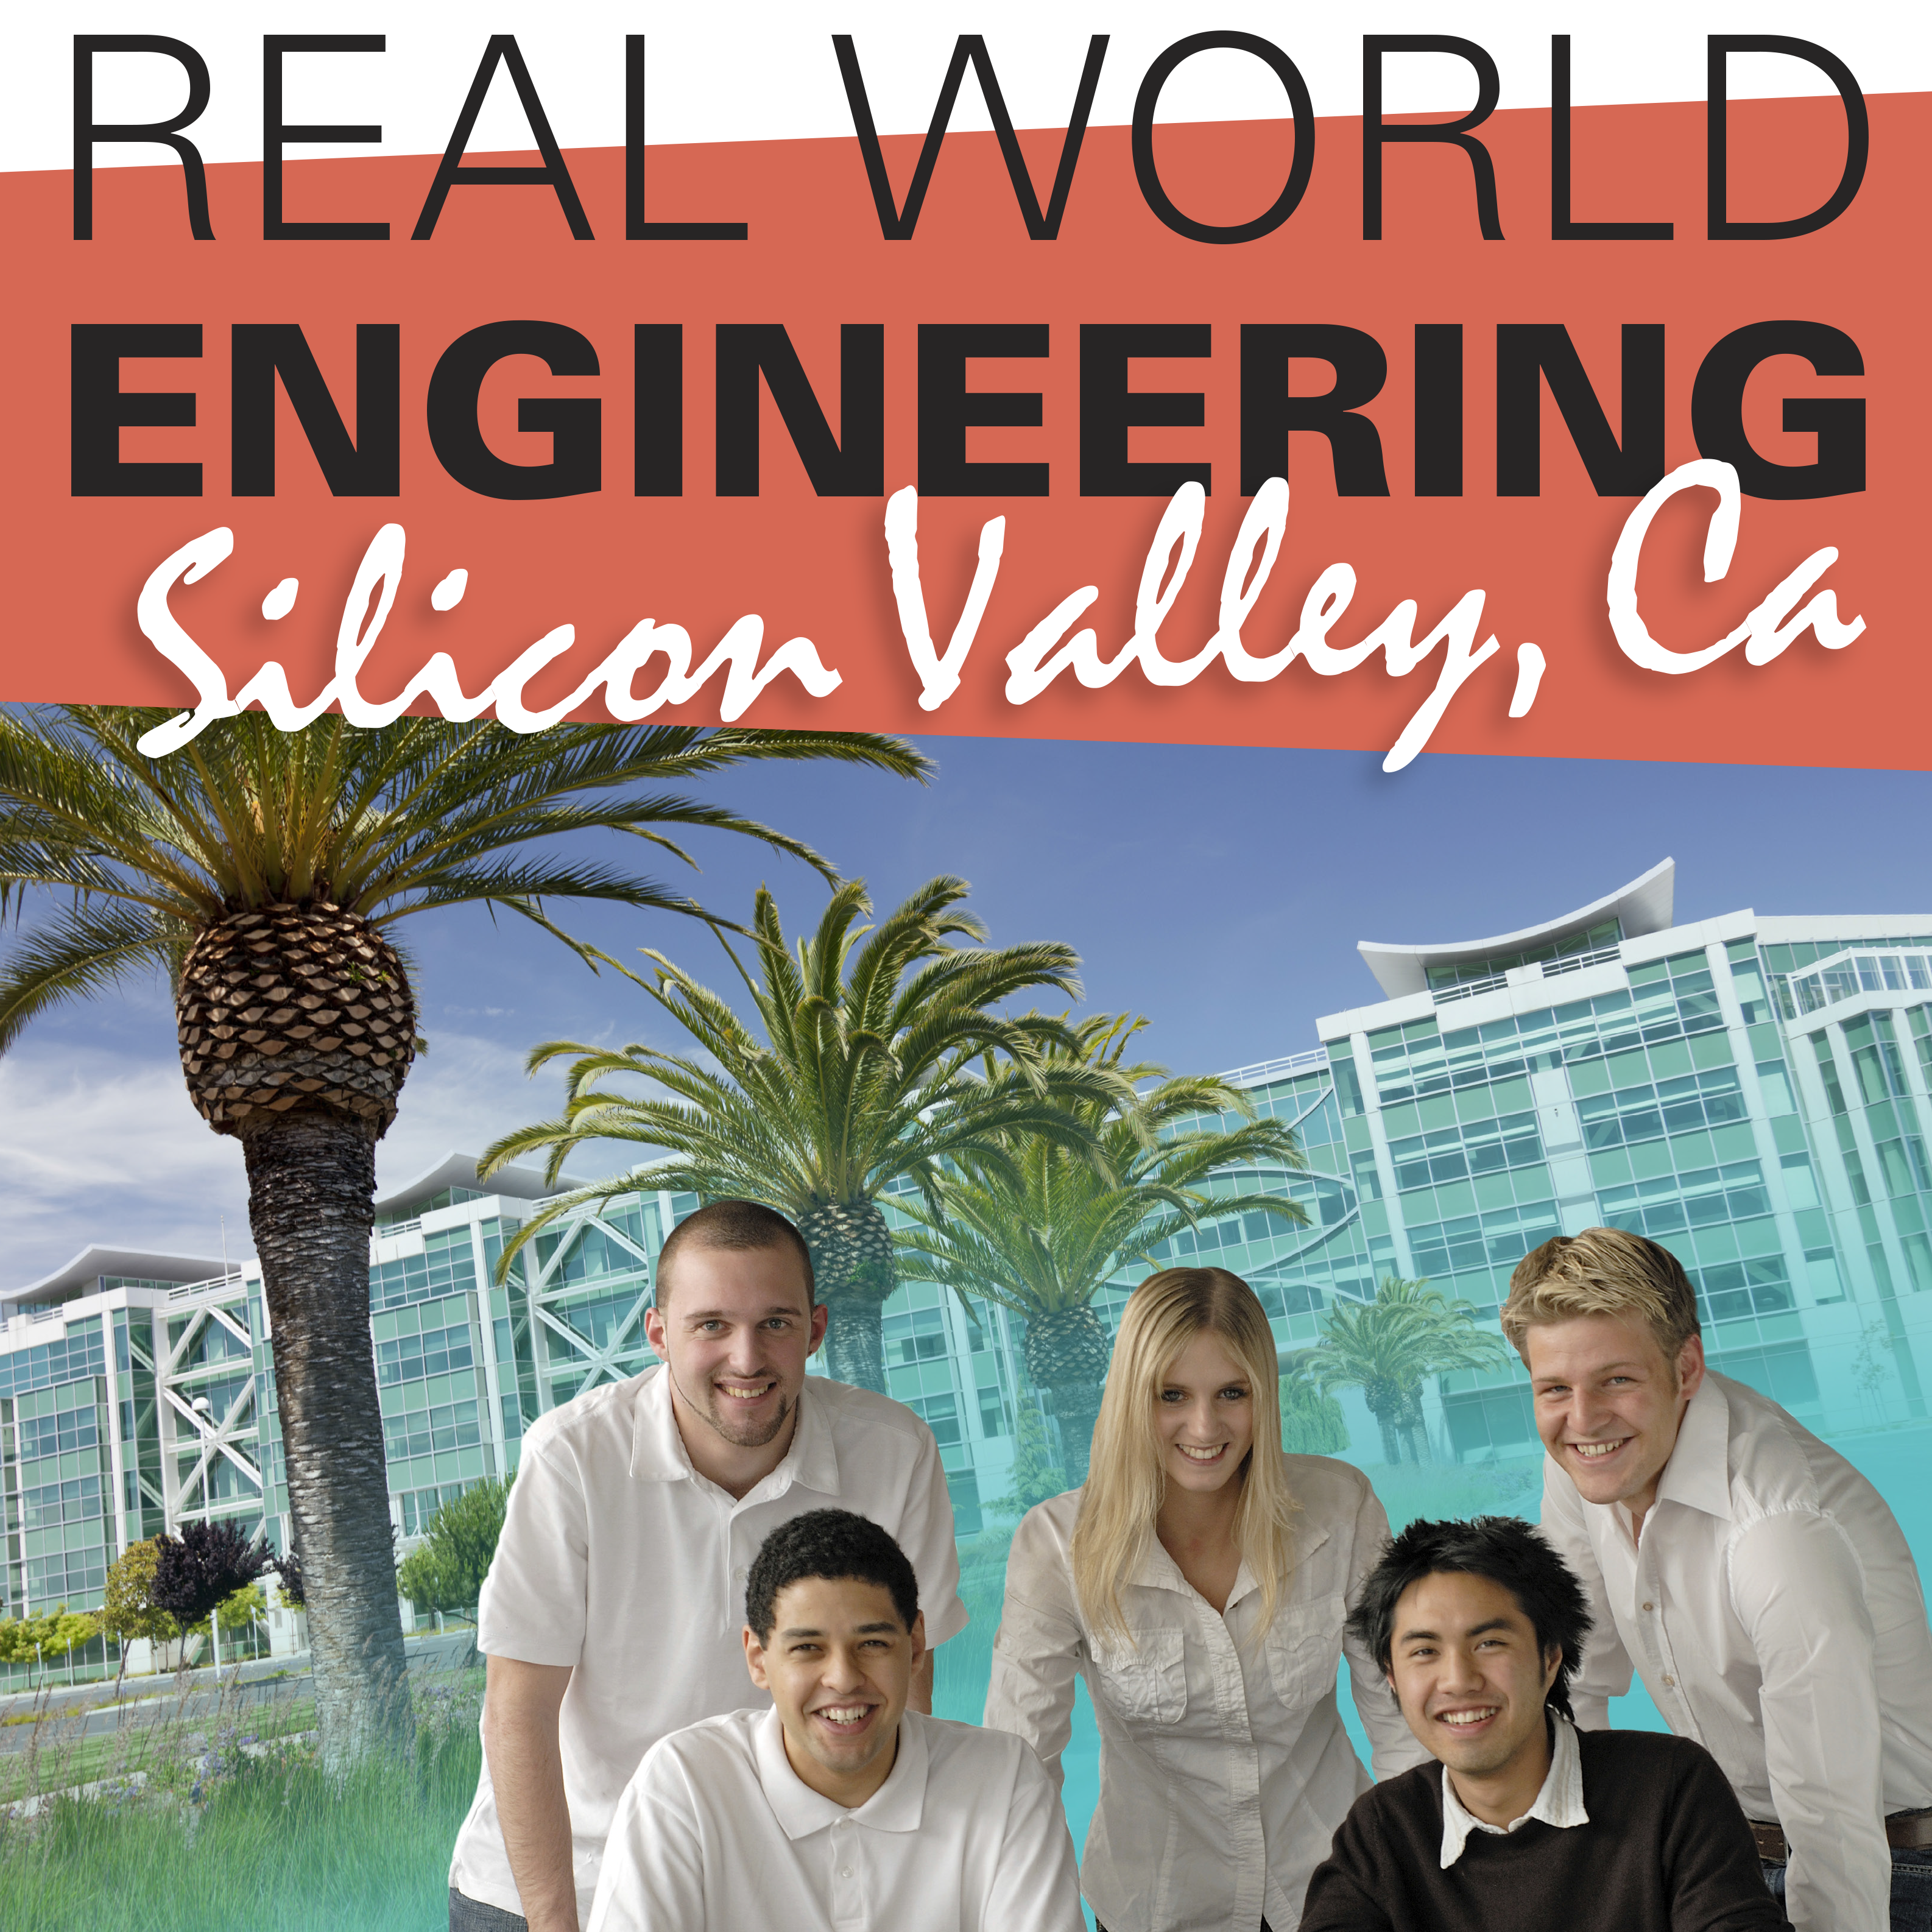 Real World Engineering - Silicon Valley